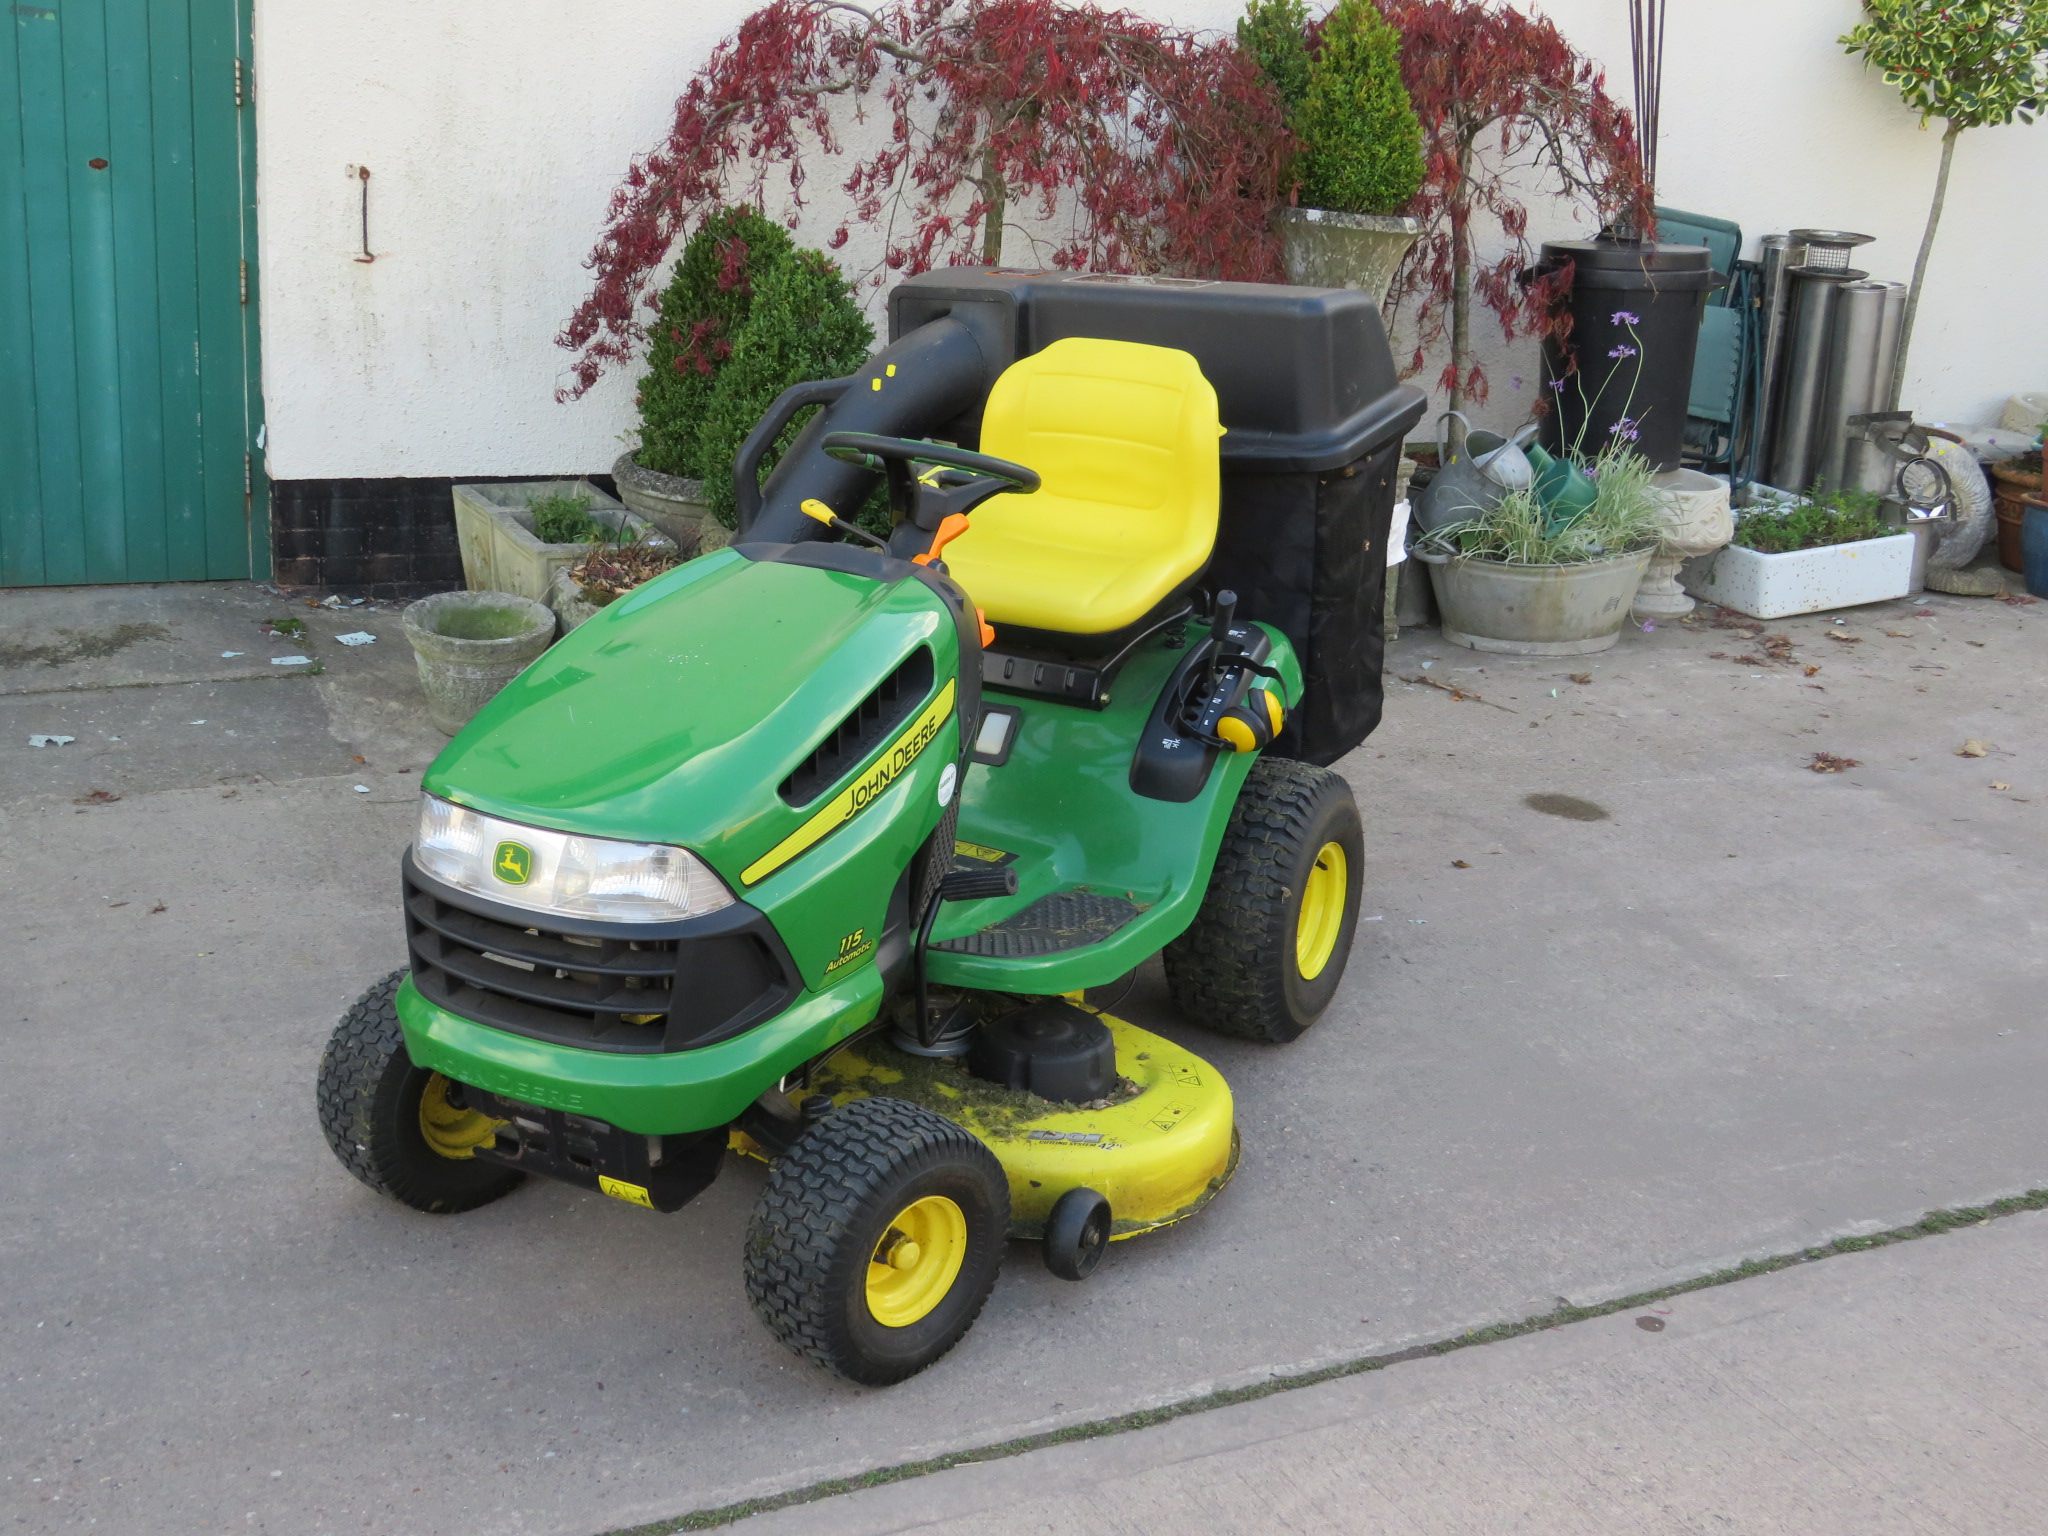 JOHN DEERE 115 AUTOMATIC RIDE ON LAWNMOWER WITH COLLECTION TUBE AND BAGS (INSIDE AUCTION ROOMS ON - Image 3 of 6